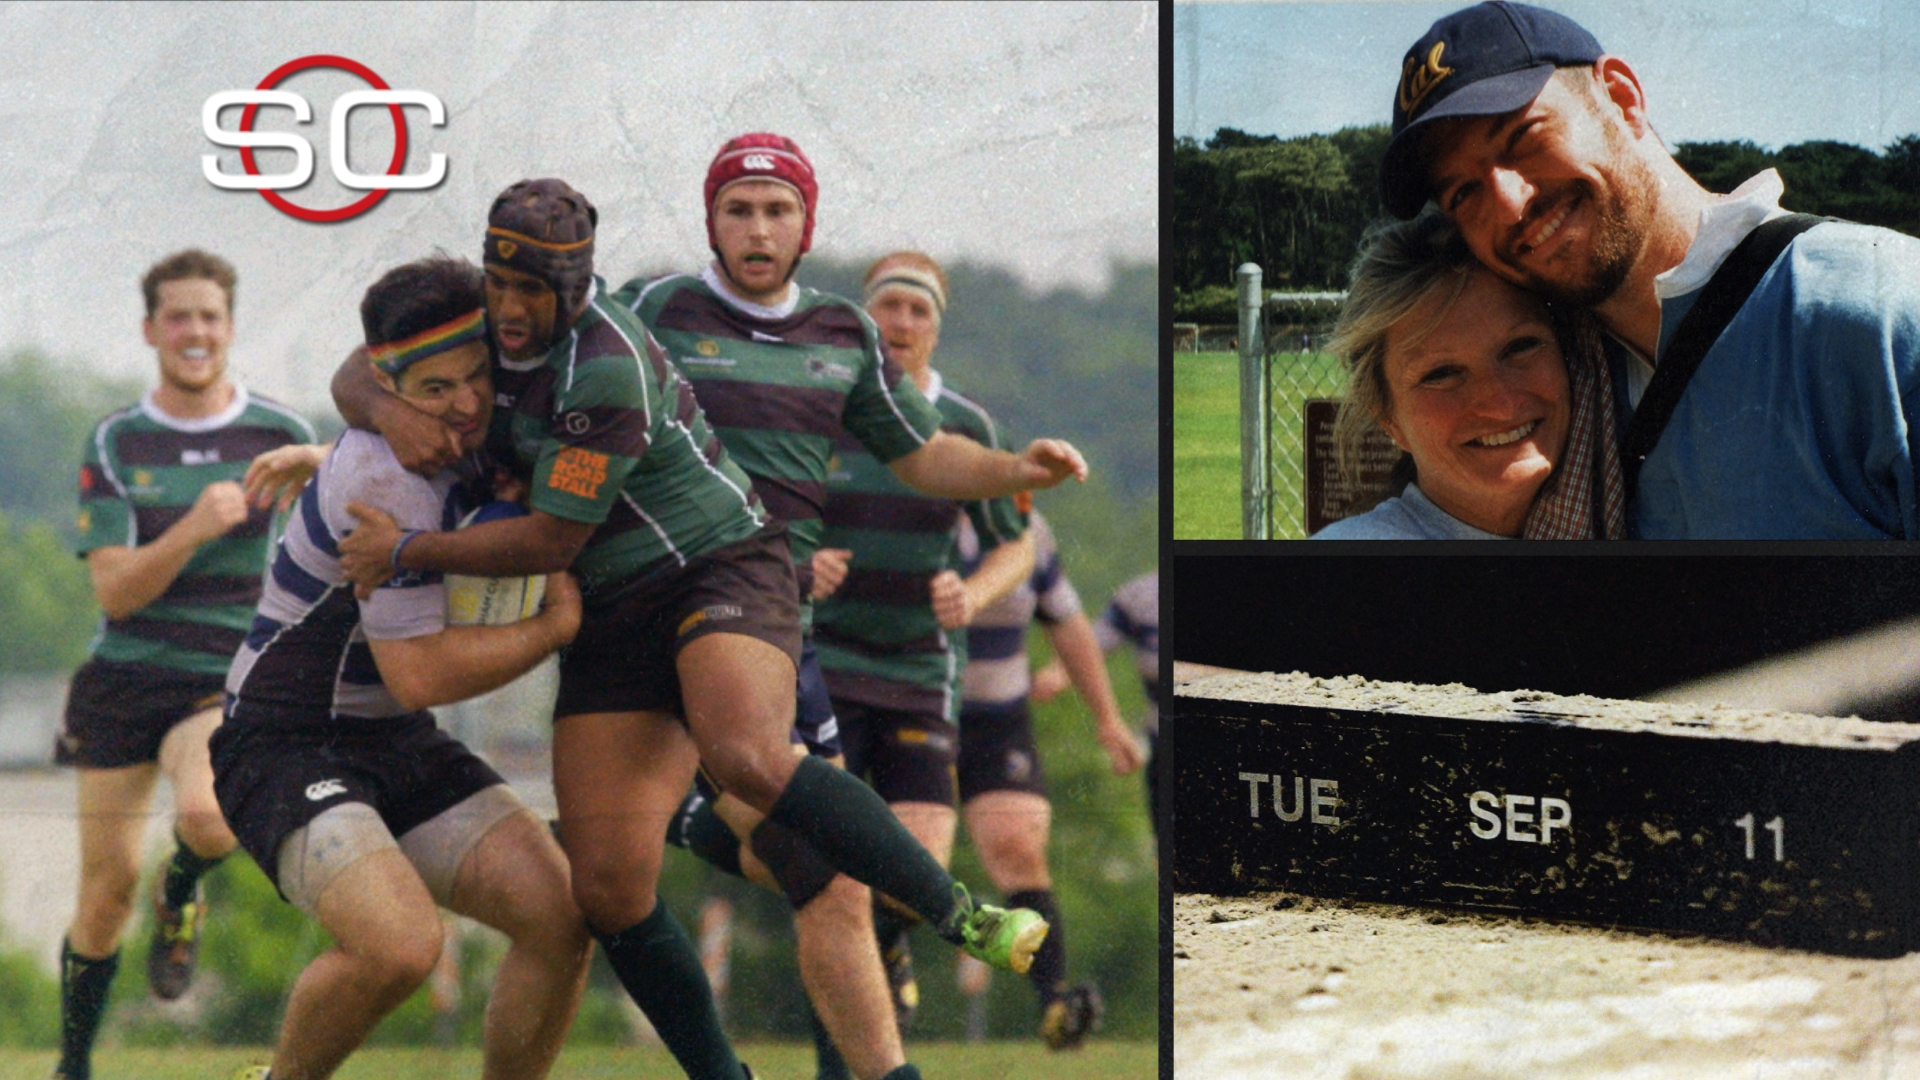 SC Featured A 9/11 heros lasting impact on rugby - Stream the Video